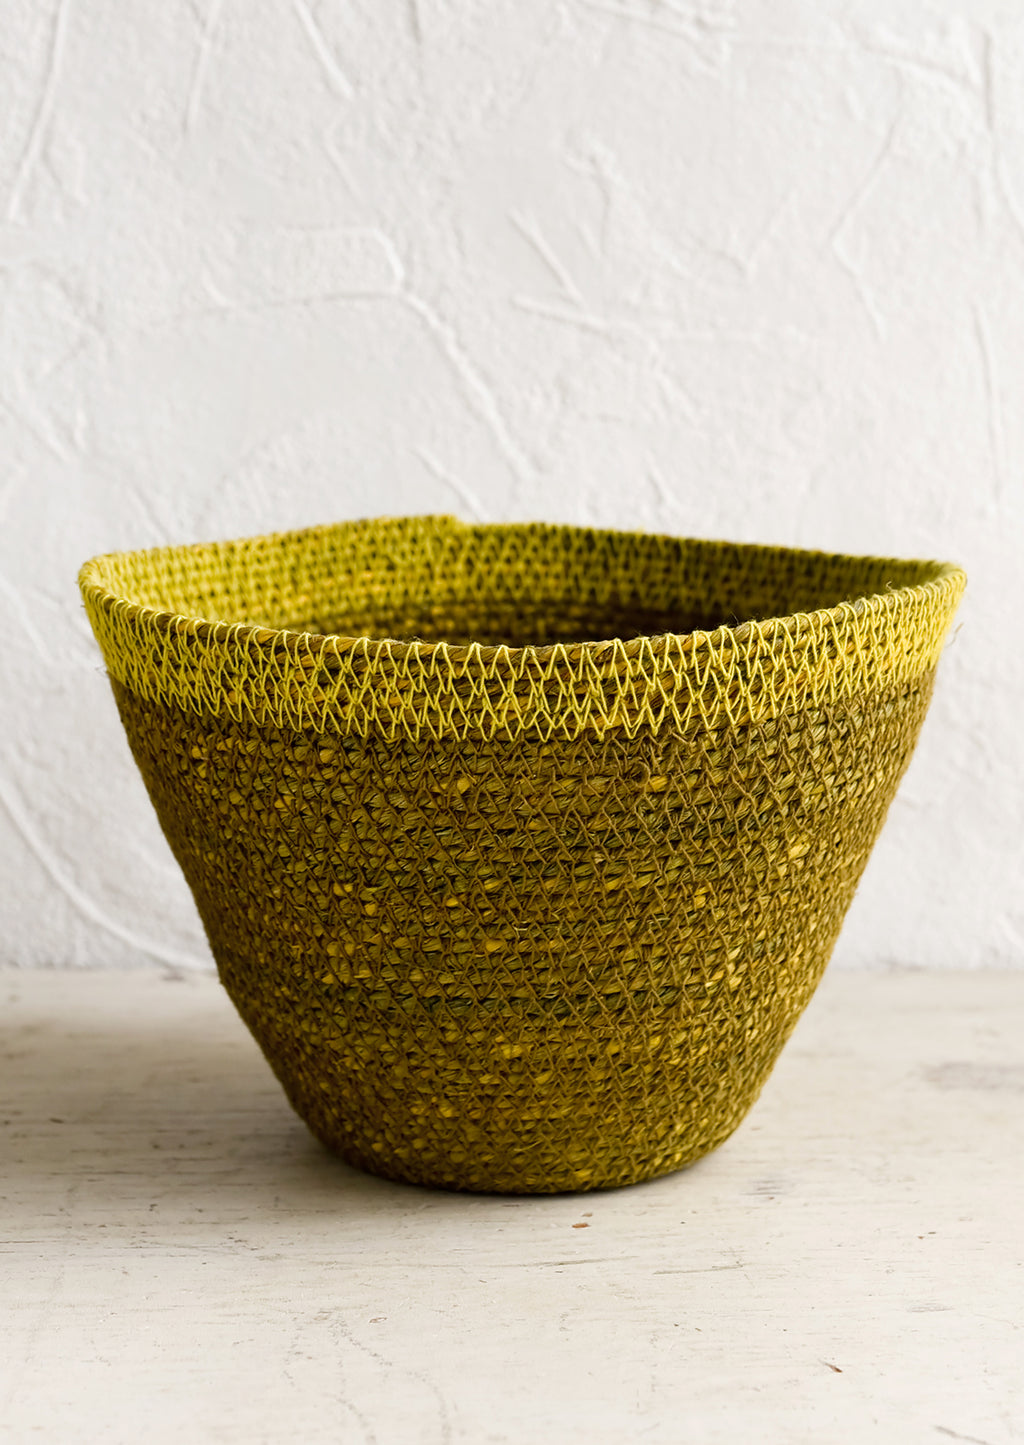 Ochre / Yellow: A tapered seagrass storage basket in ochre with yellow rim.